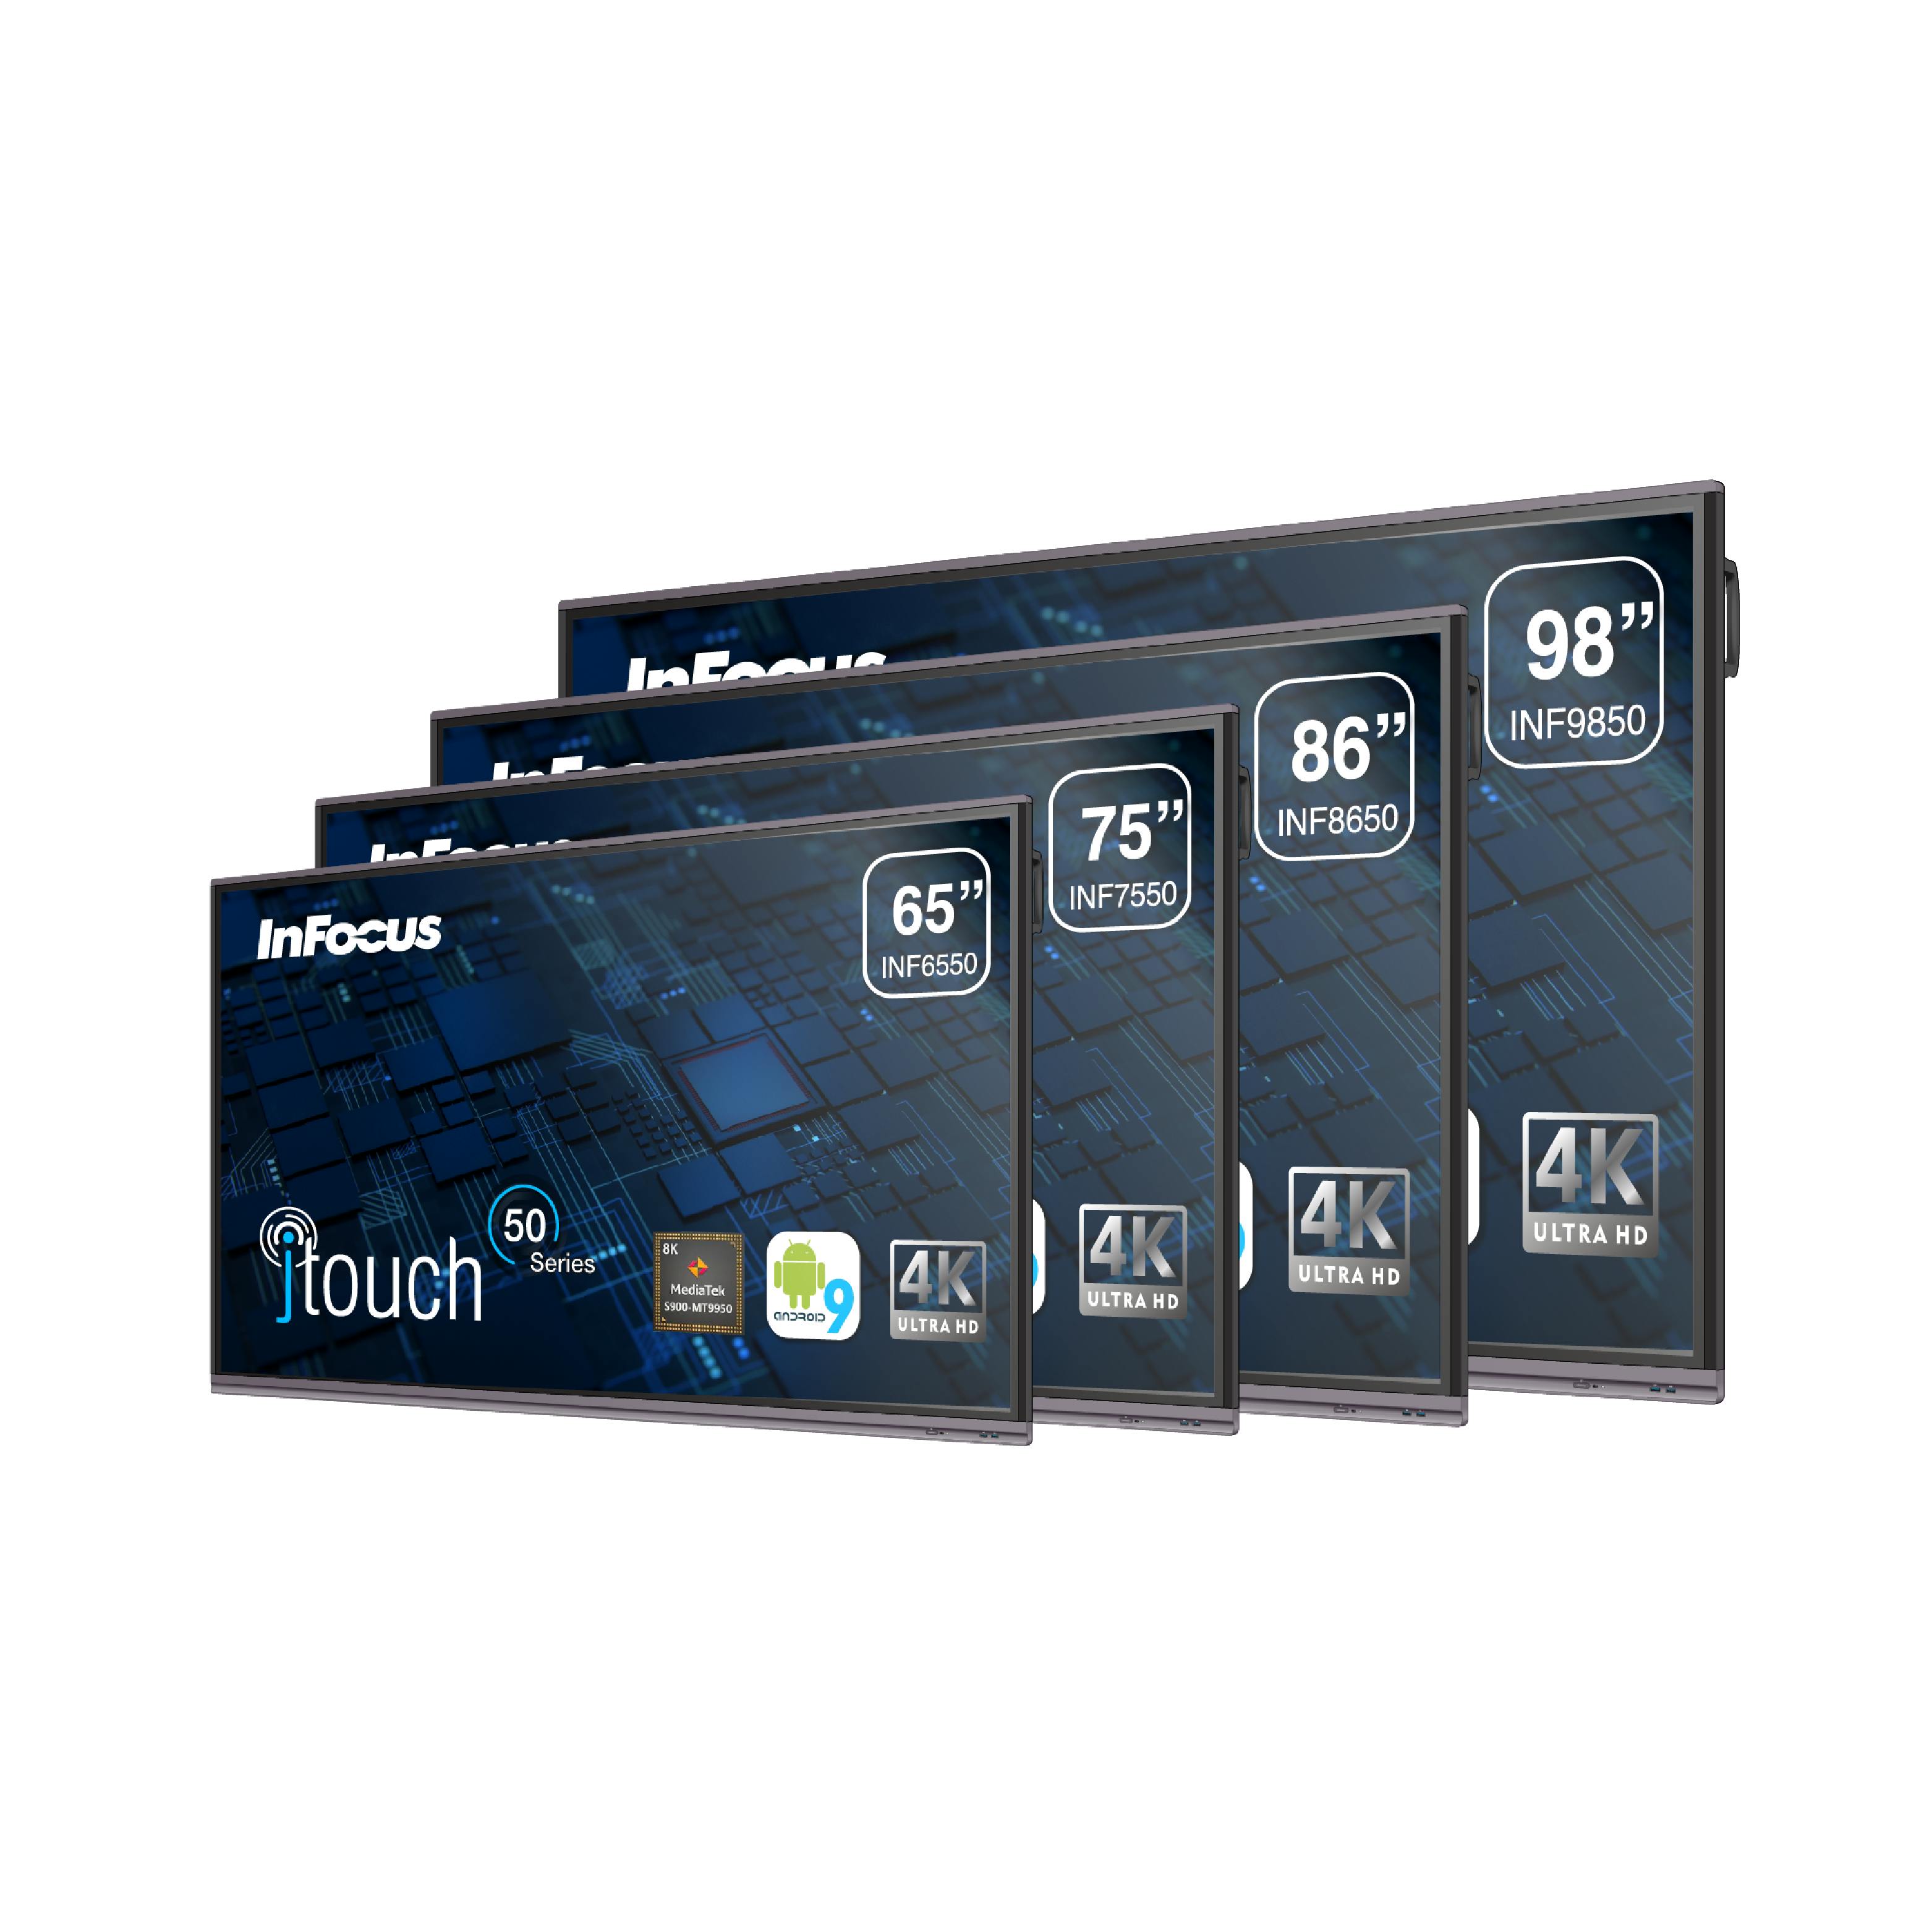 https://infocus.imgix.net/2022/04/JTouch-50-Series_Group_F_90-01.png?auto=compress%2Cformat&ixlib=php-3.3.1